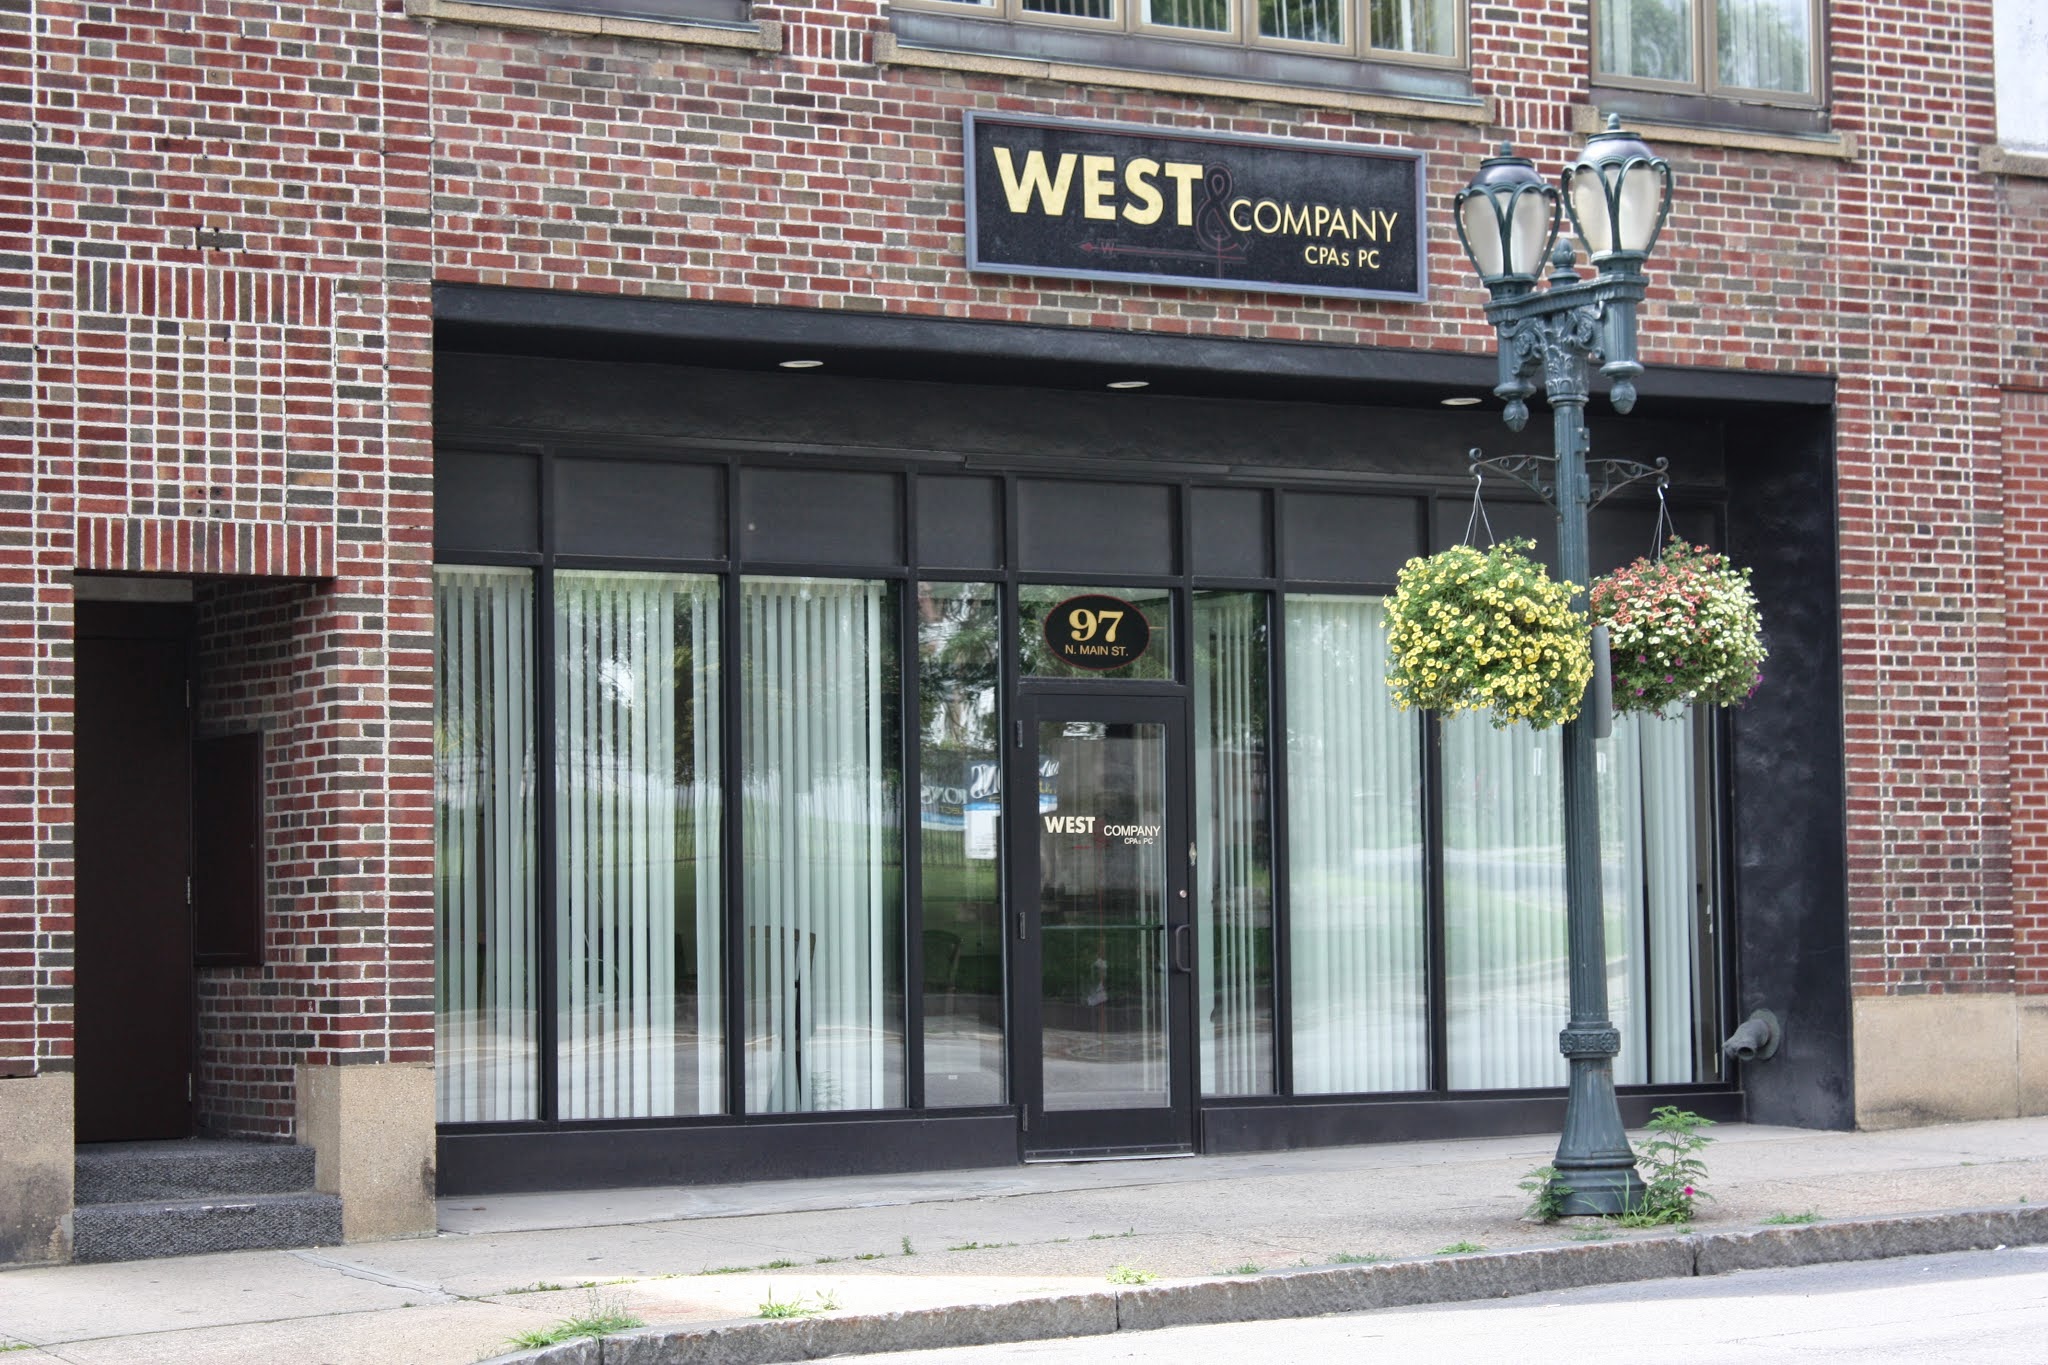 WEST & Company CPA's PC 97 N Main St, Gloversville New York 12078